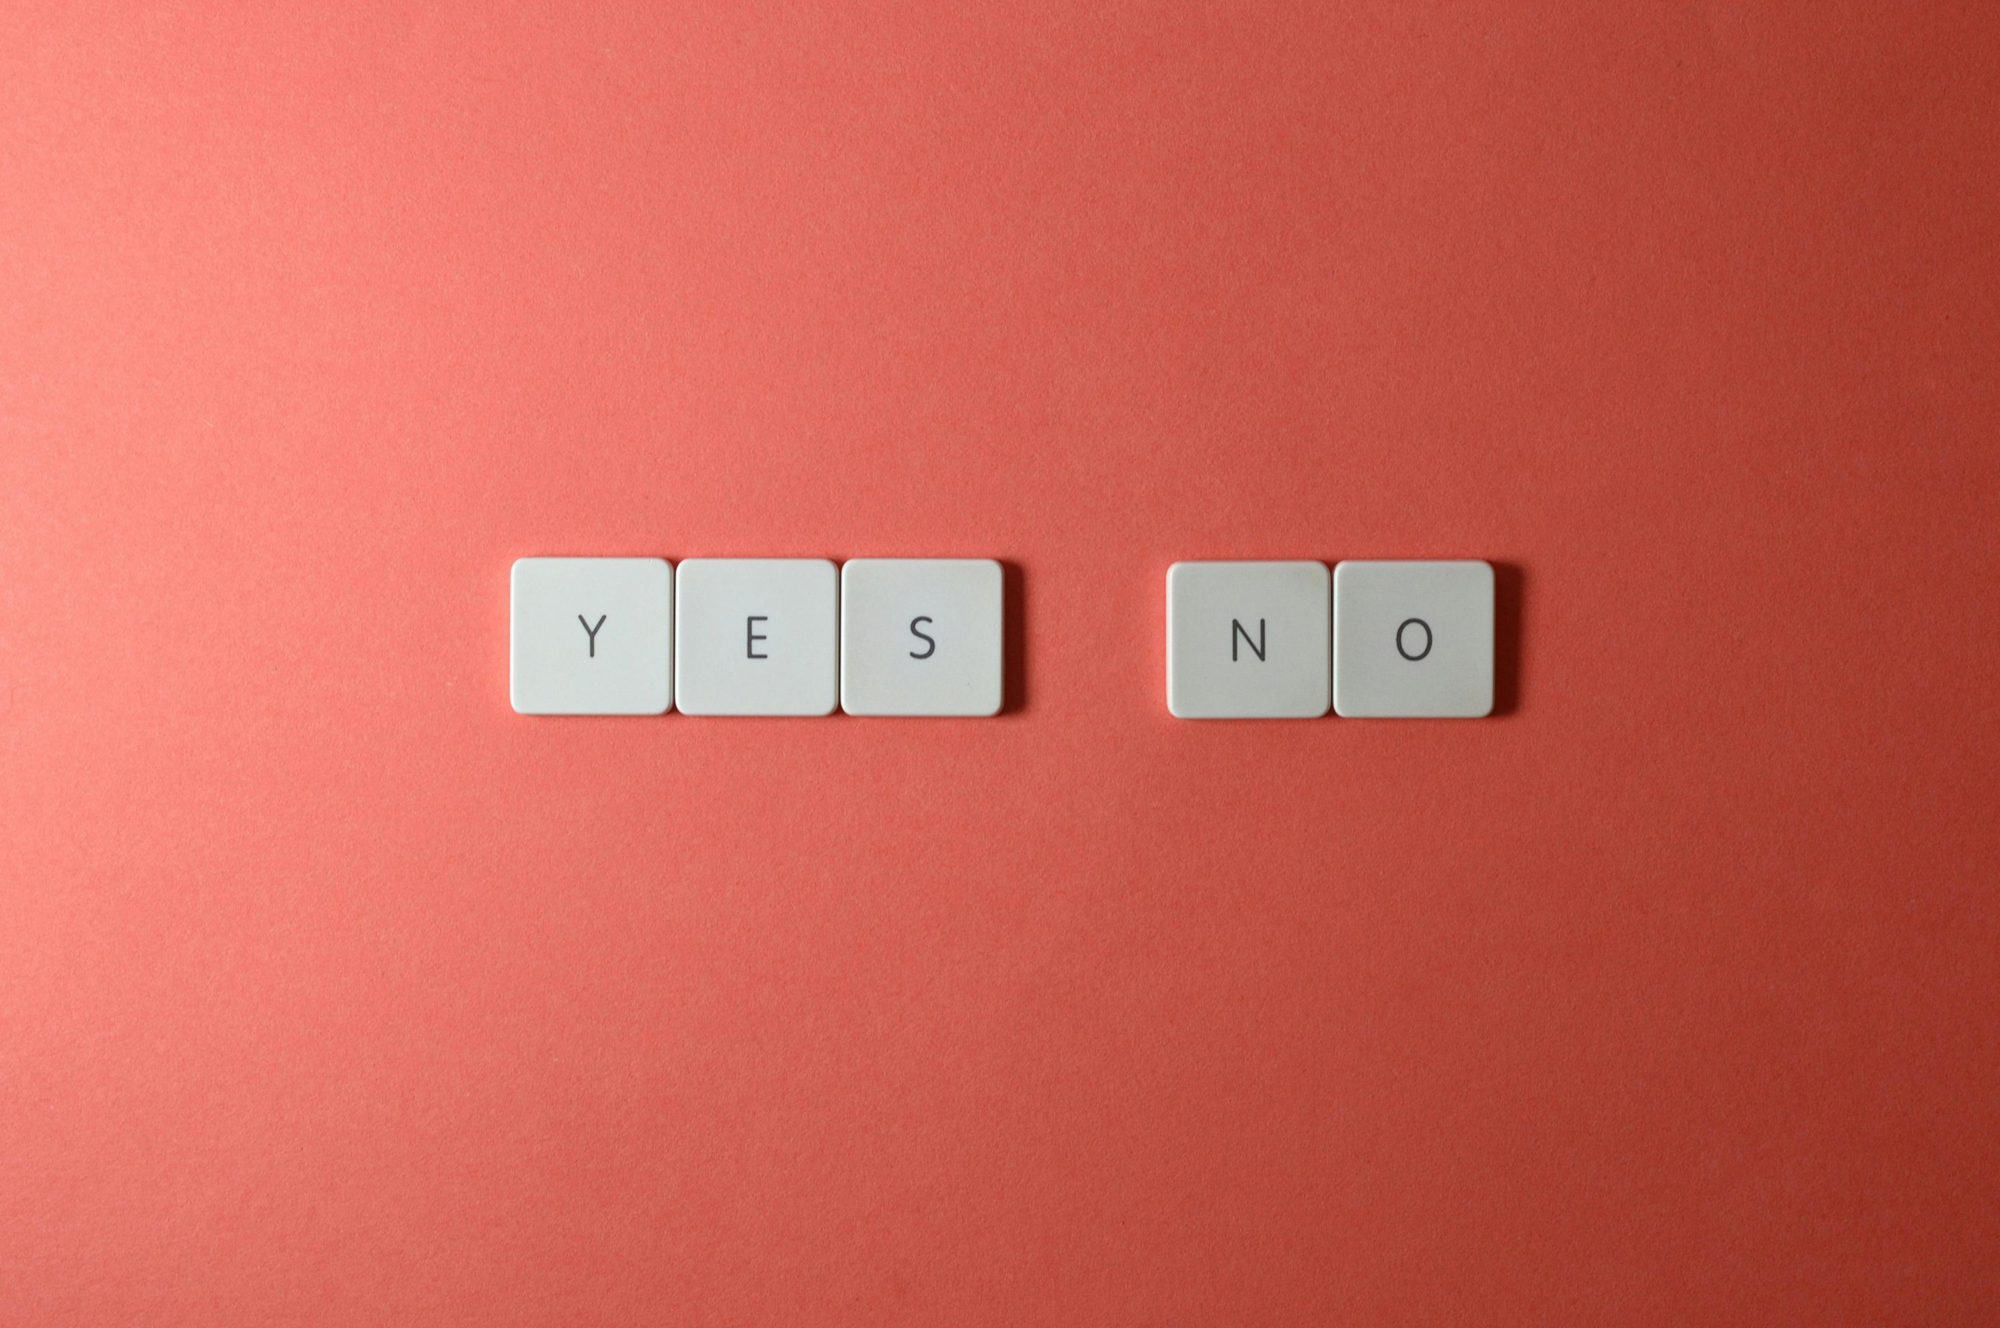 When Saying “No” Means “Yes”